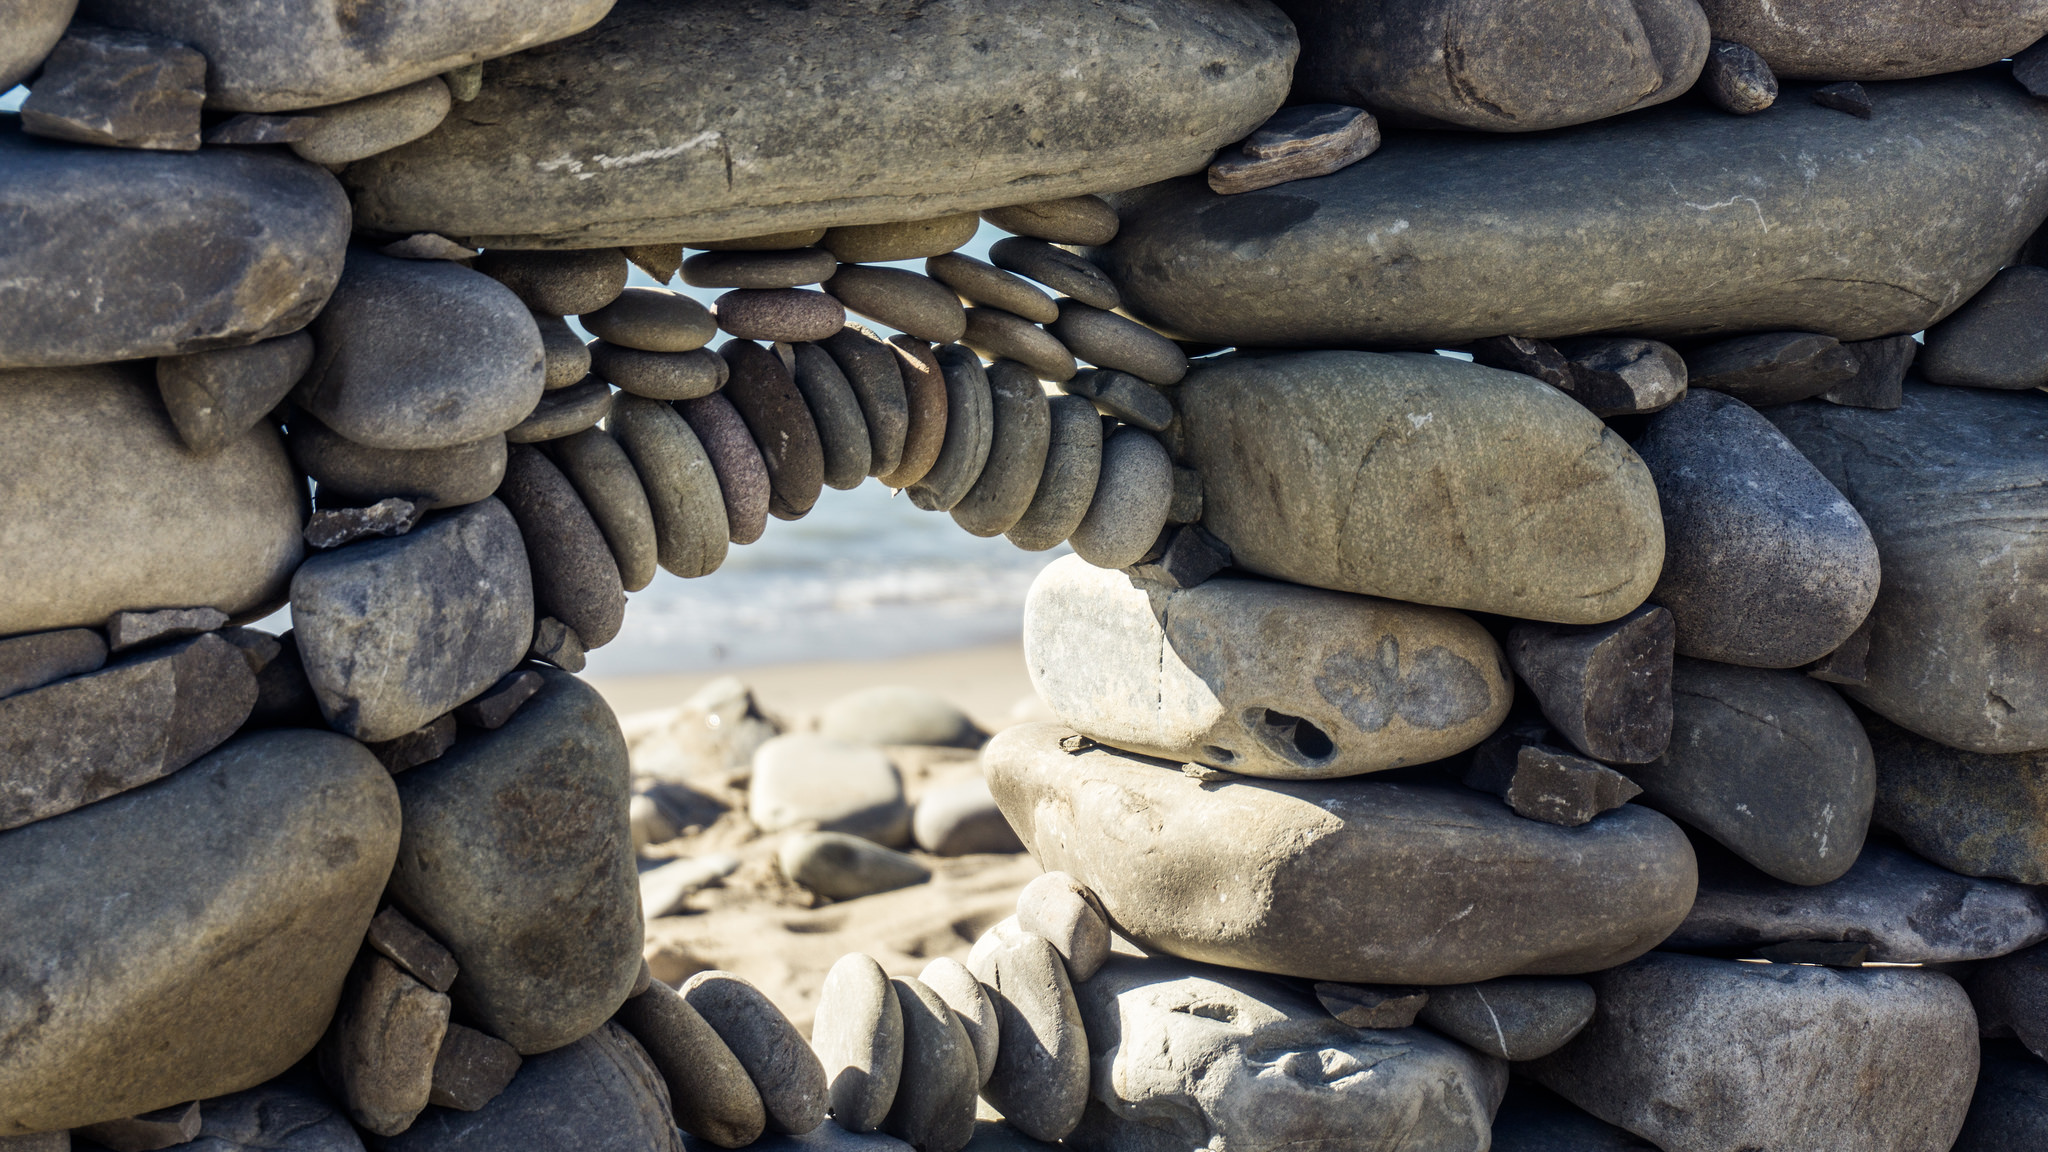 My name is Juan Manuel and I'm the man behind the stone art on Ventura beaches